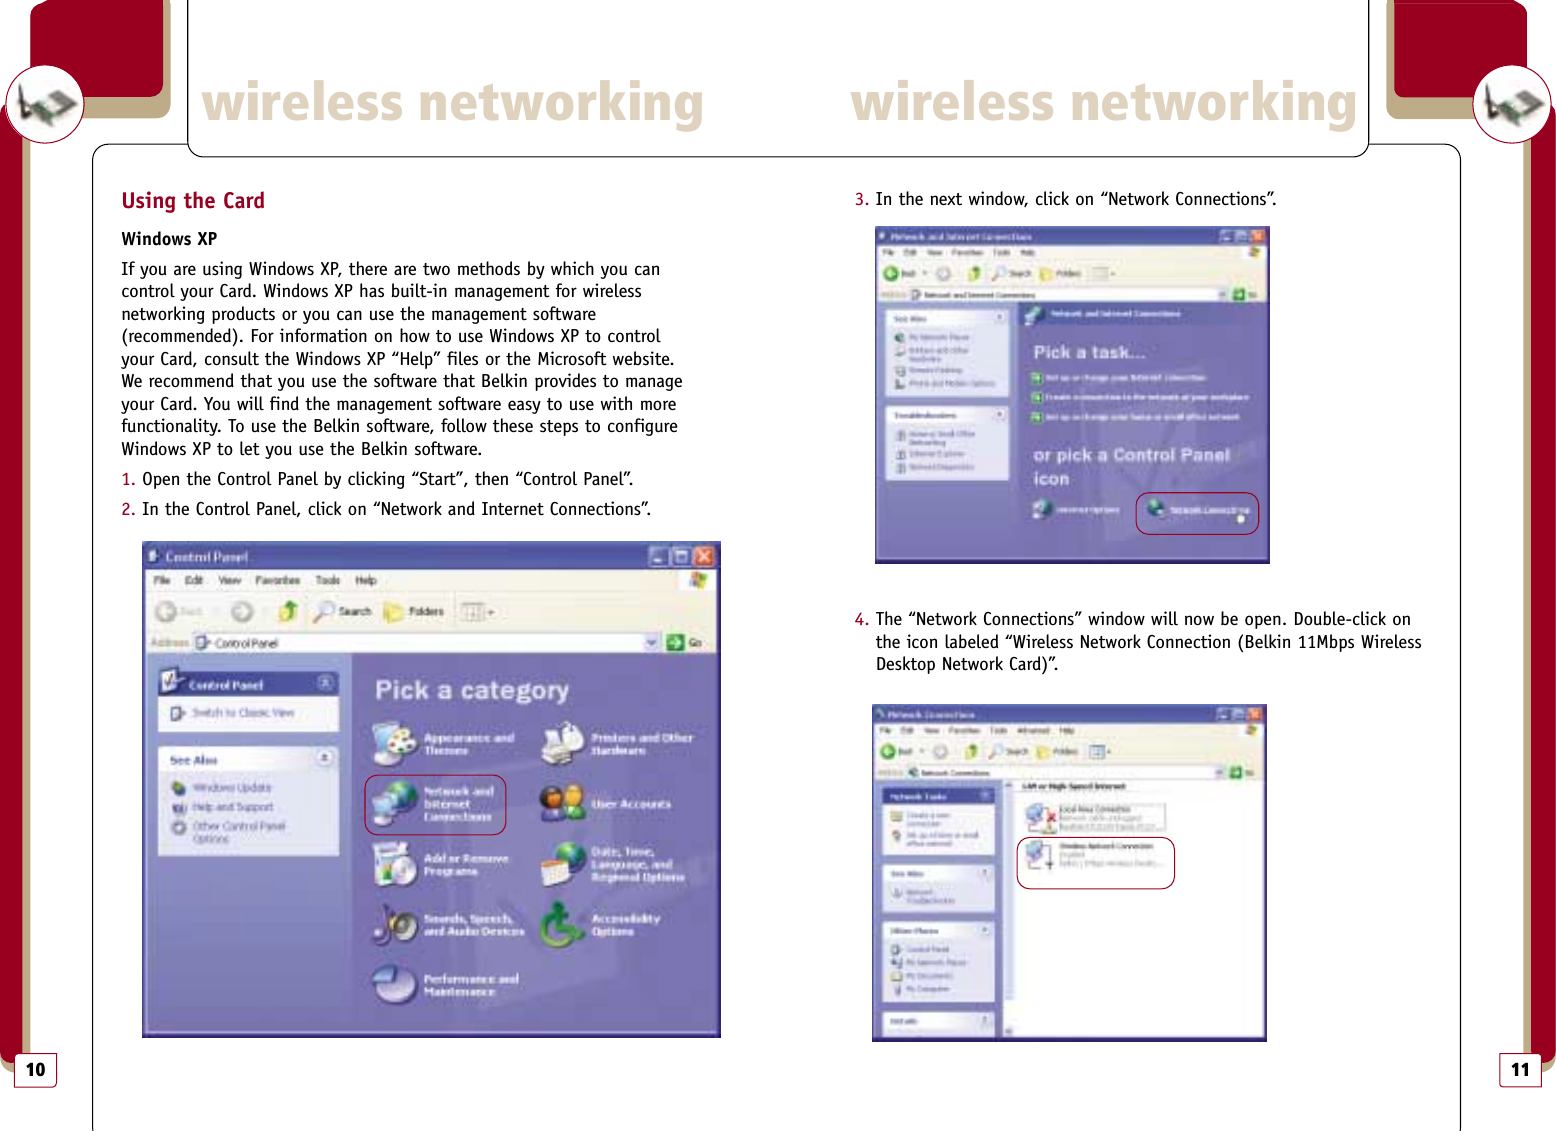 113. In the next window, click on “Network Connections”. 4. The “Network Connections” window will now be open. Double-click onthe icon labeled “Wireless Network Connection (Belkin 11Mbps WirelessDesktop Network Card)”. wireless networkingwireless networking10Using the CardWindows XPIf you are using Windows XP, there are two methods by which you can control your Card. Windows XP has built-in management for wireless networking products or you can use the management software (recommended). For information on how to use Windows XP to control your Card, consult the Windows XP “Help” files or the Microsoft website.We recommend that you use the software that Belkin provides to manageyour Card. You will find the management software easy to use with morefunctionality. To use the Belkin software, follow these steps to configureWindows XP to let you use the Belkin software.1. Open the Control Panel by clicking “Start”, then “Control Panel”.2. In the Control Panel, click on “Network and Internet Connections”.